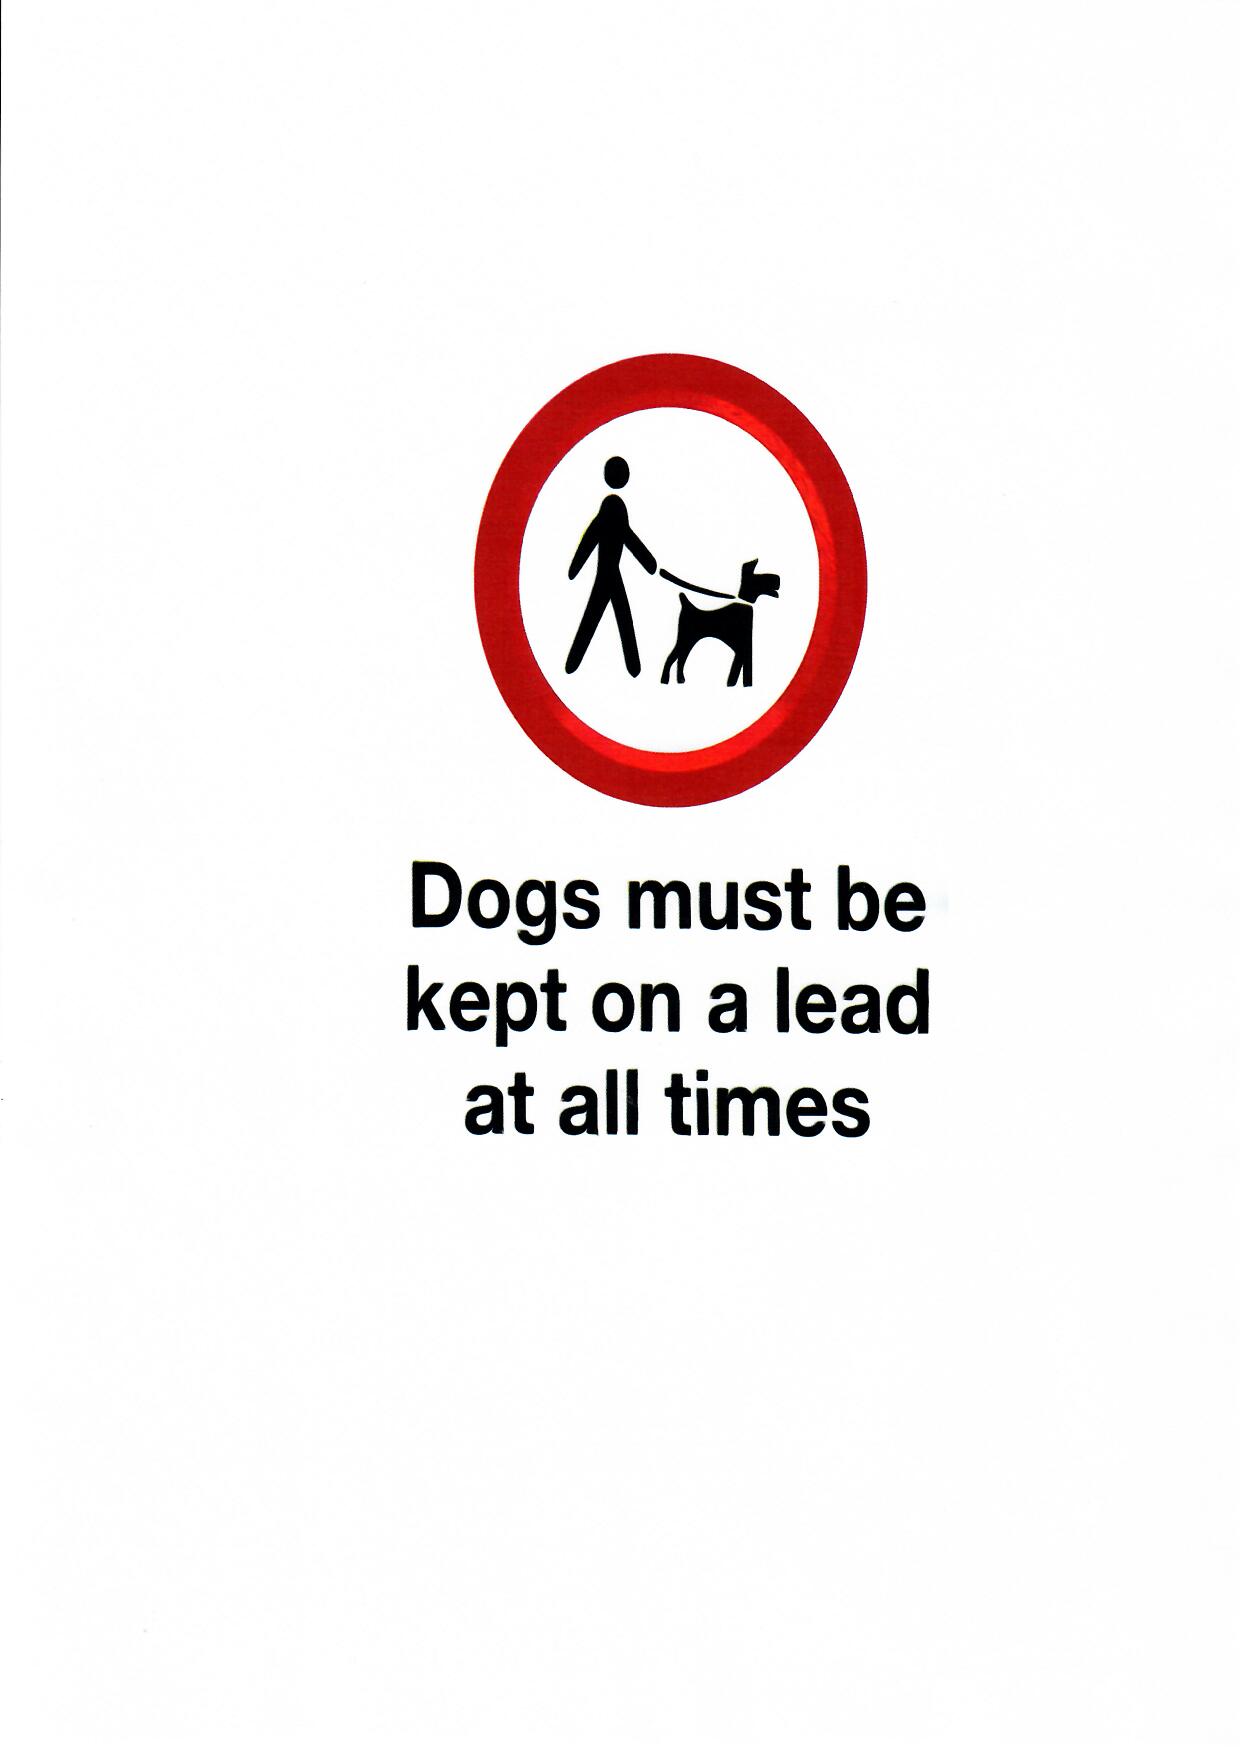 Ightfield Parish Council Polite request to dog walkers